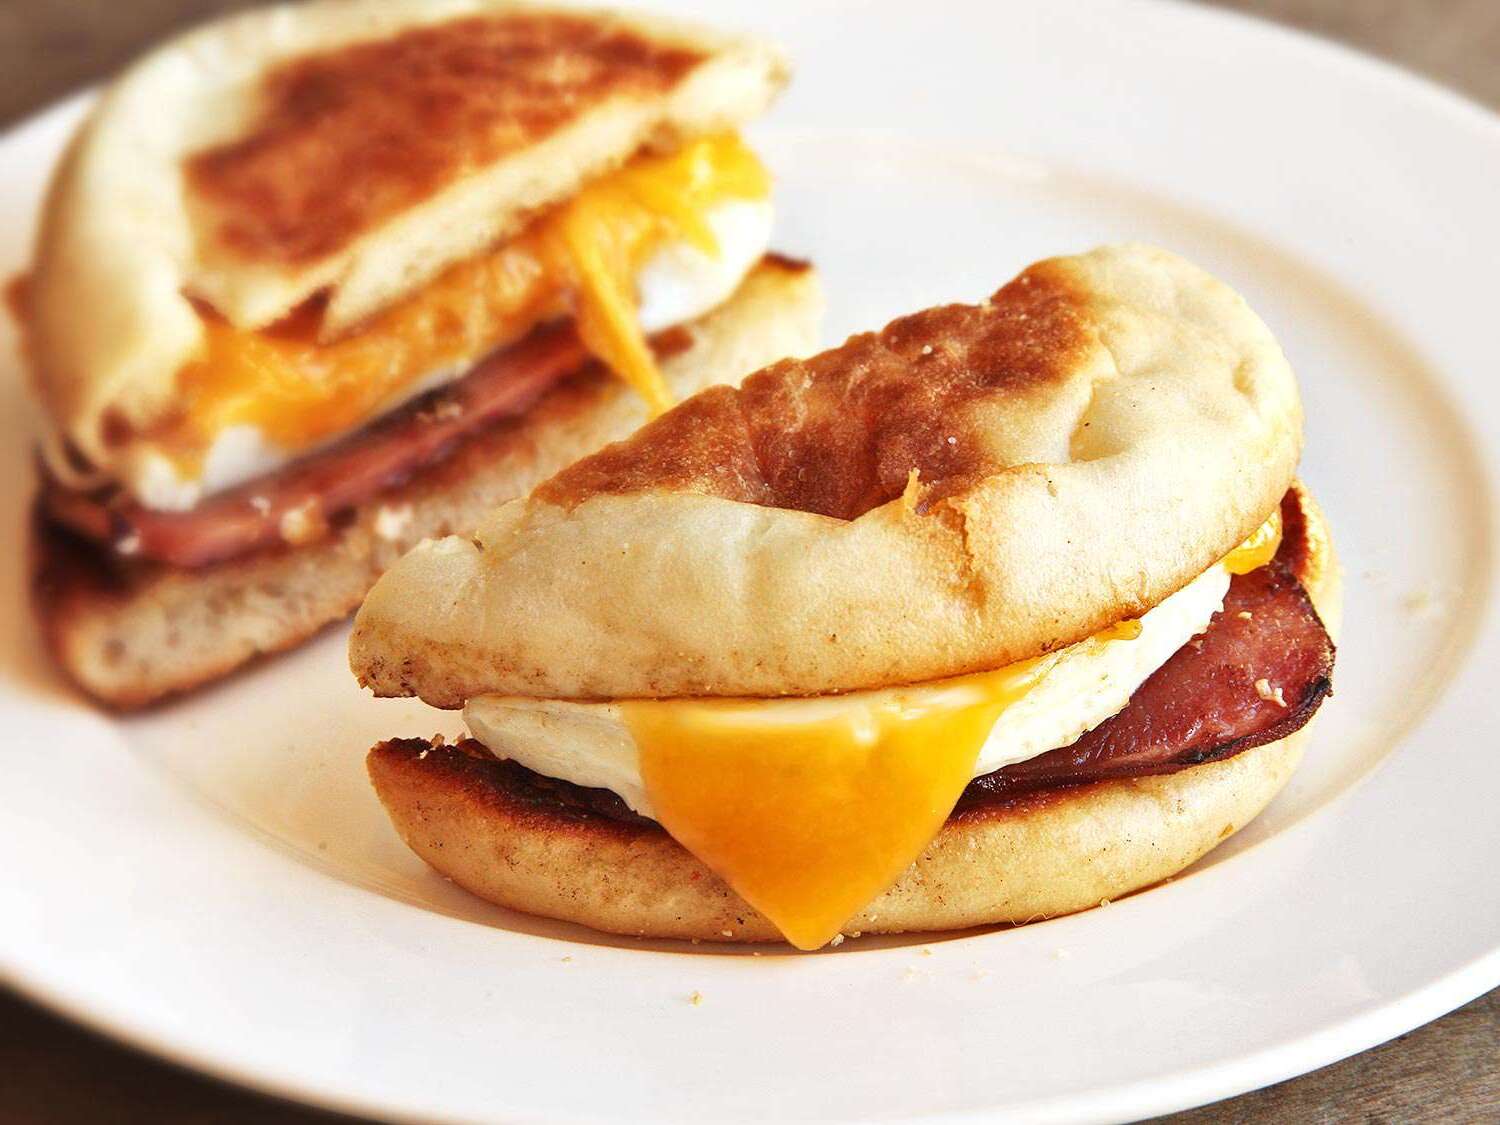 15-nutritional-facts-about-egg-mcmuffins